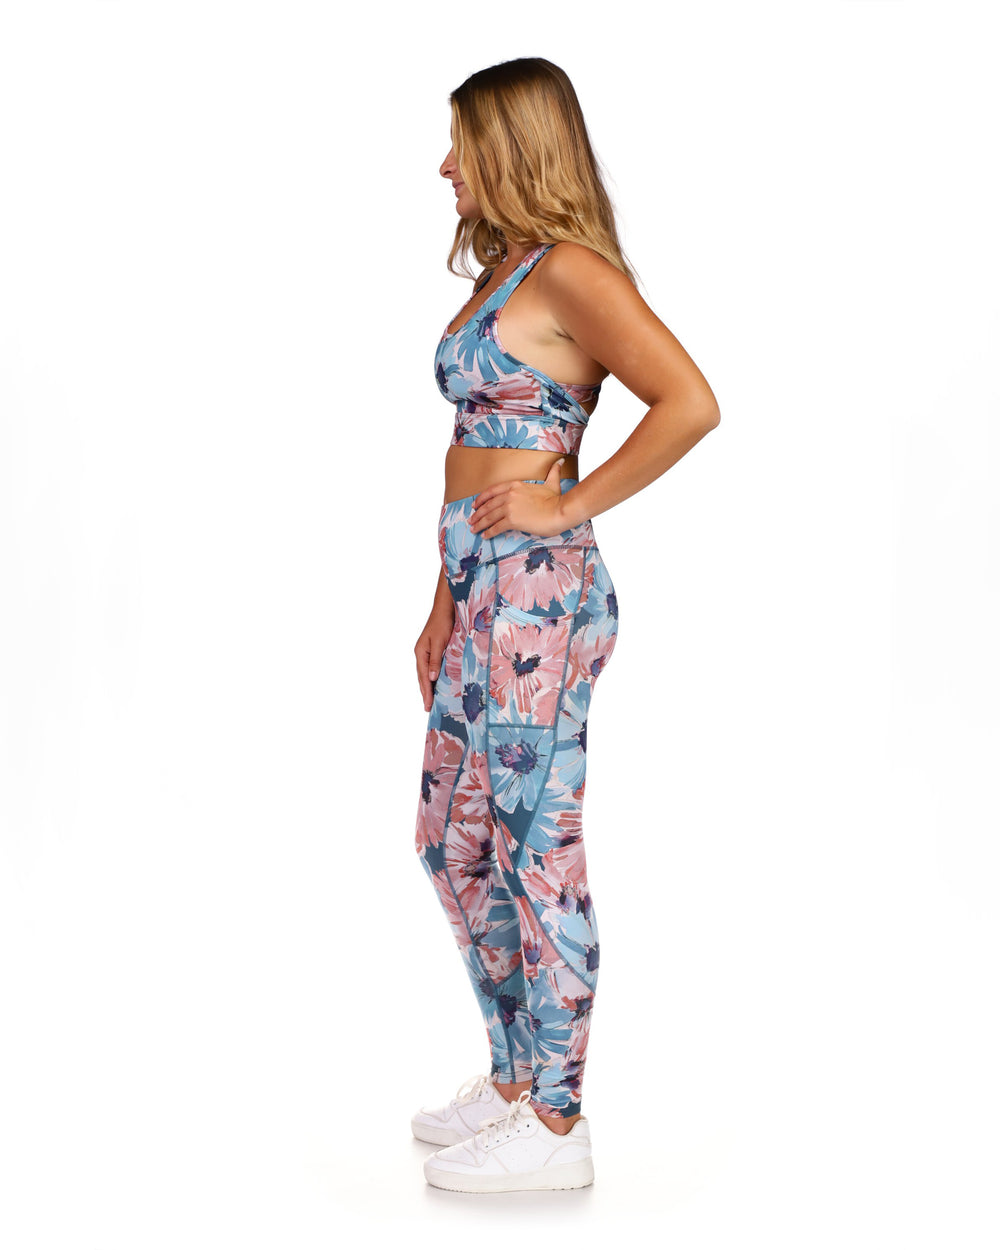 All-Over-Print Full-Length Legging With Pockets - Daisy Teal